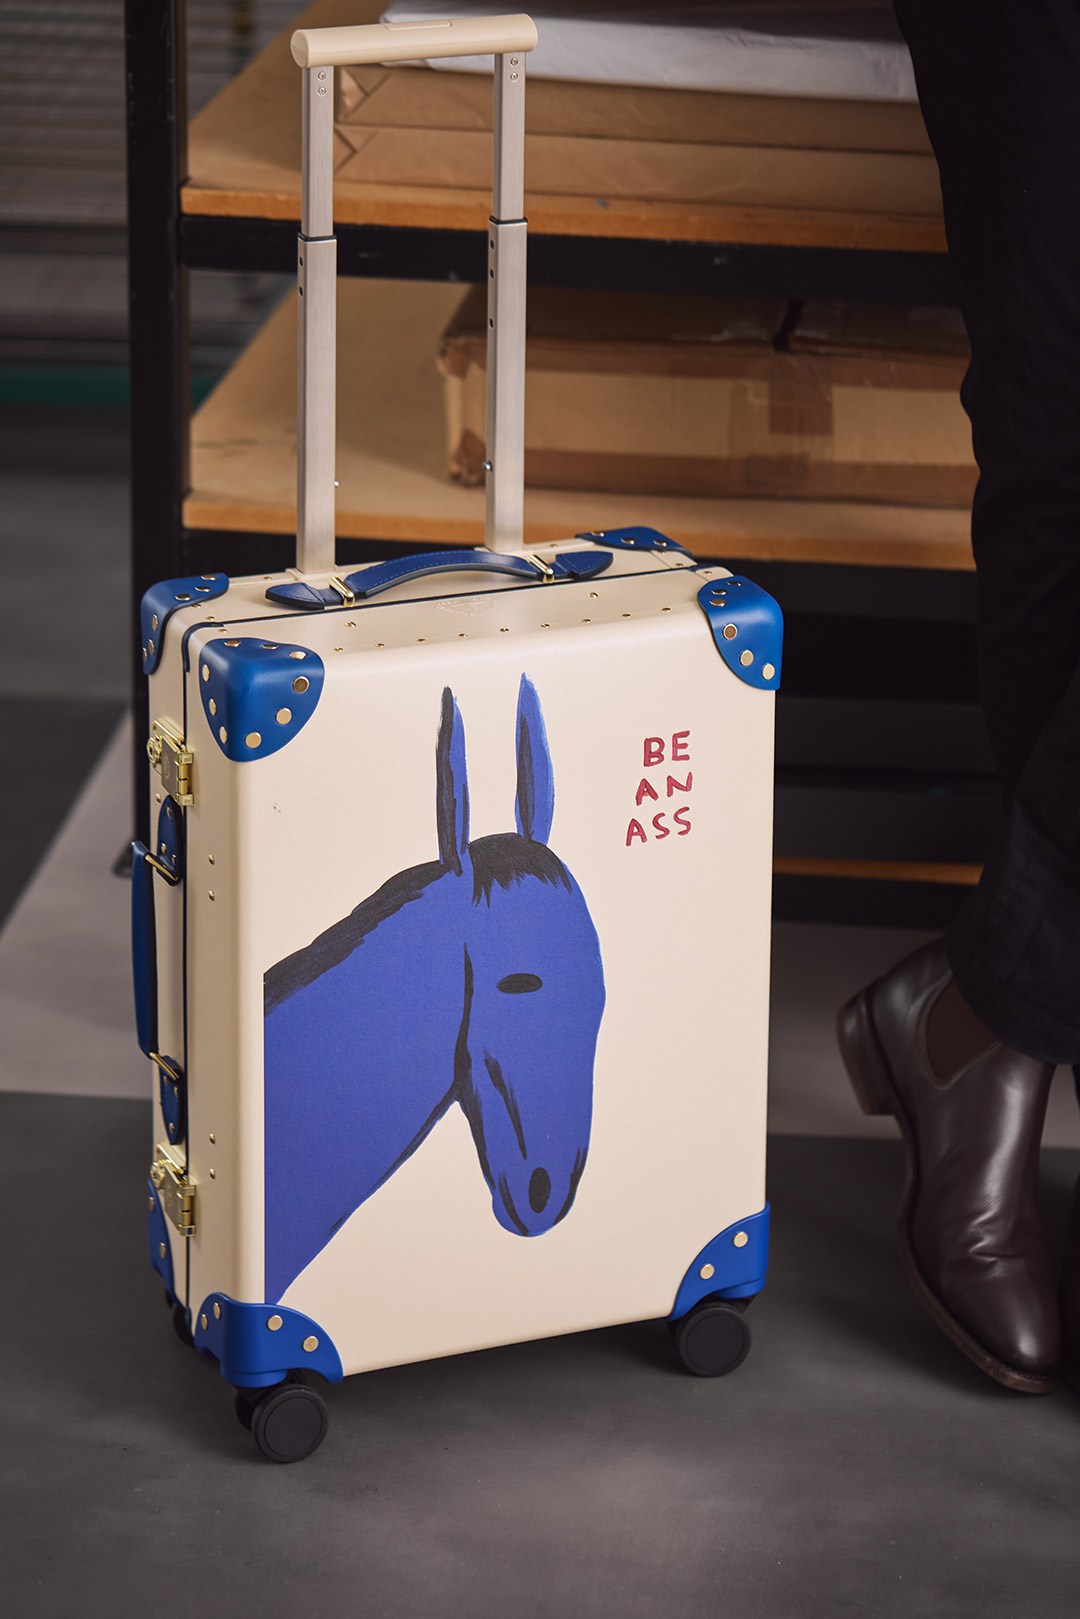 david-shrigley-brightens-up-globe-trotter-suitcases-with-humorous-illustrations